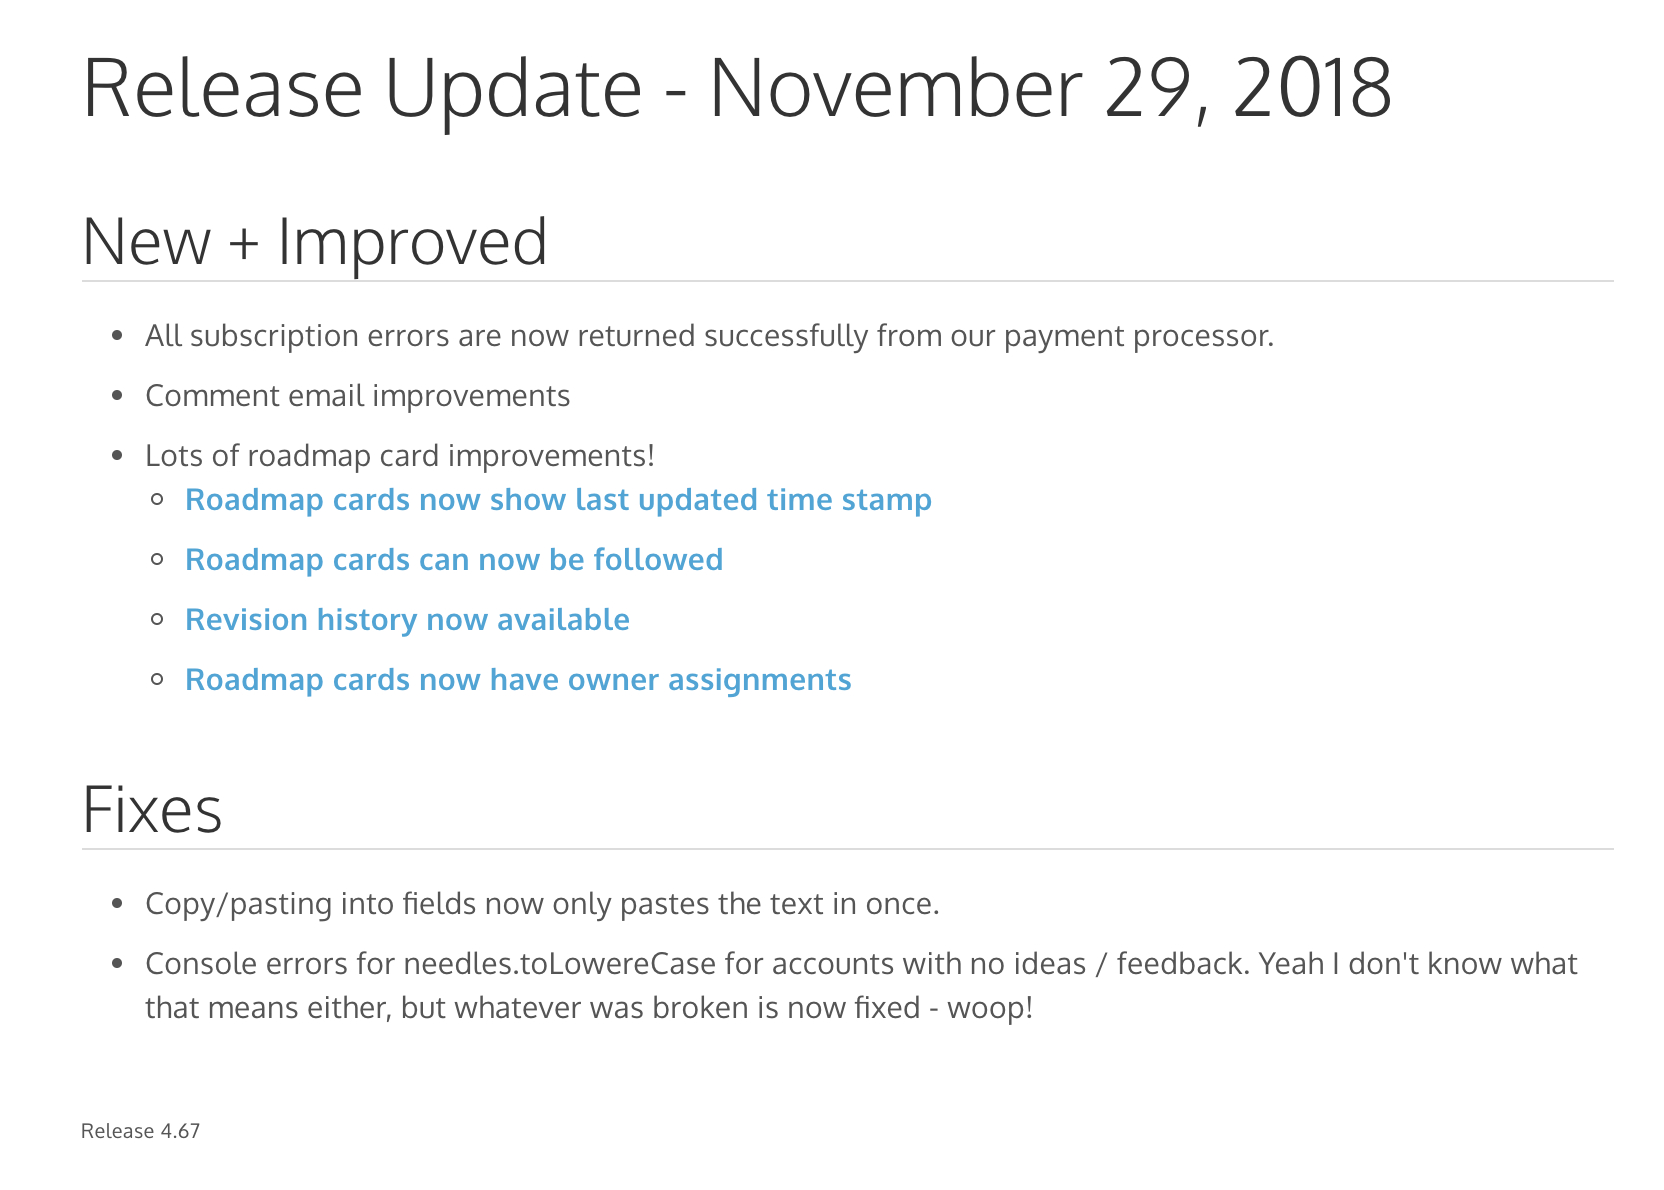 How To Write Great Release Notes | Prodpad Regarding Software Release Notes Template Word